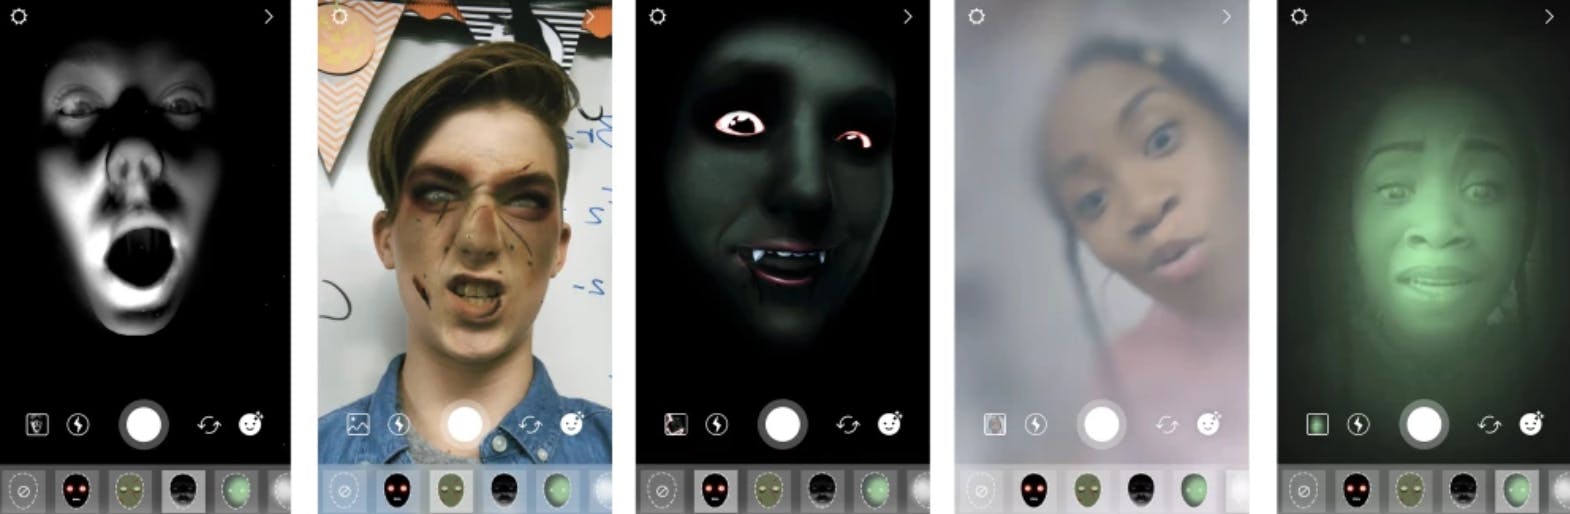 instagram face filters stickers